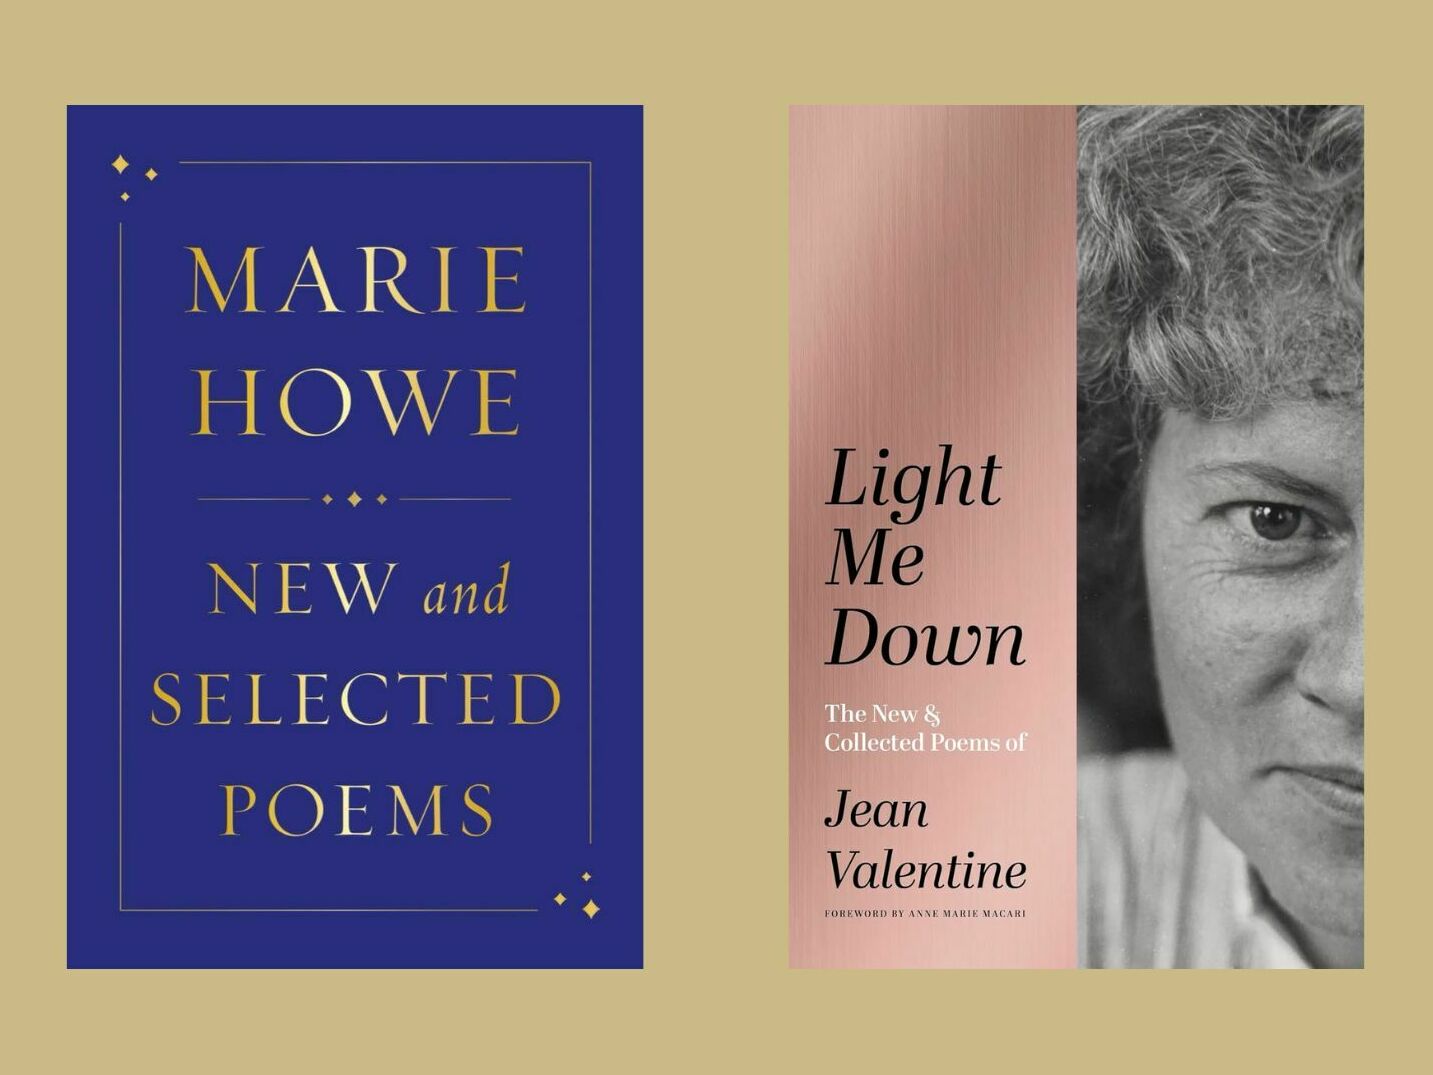 As National Poetry Month comes to a close, 2 new retrospectives to savor